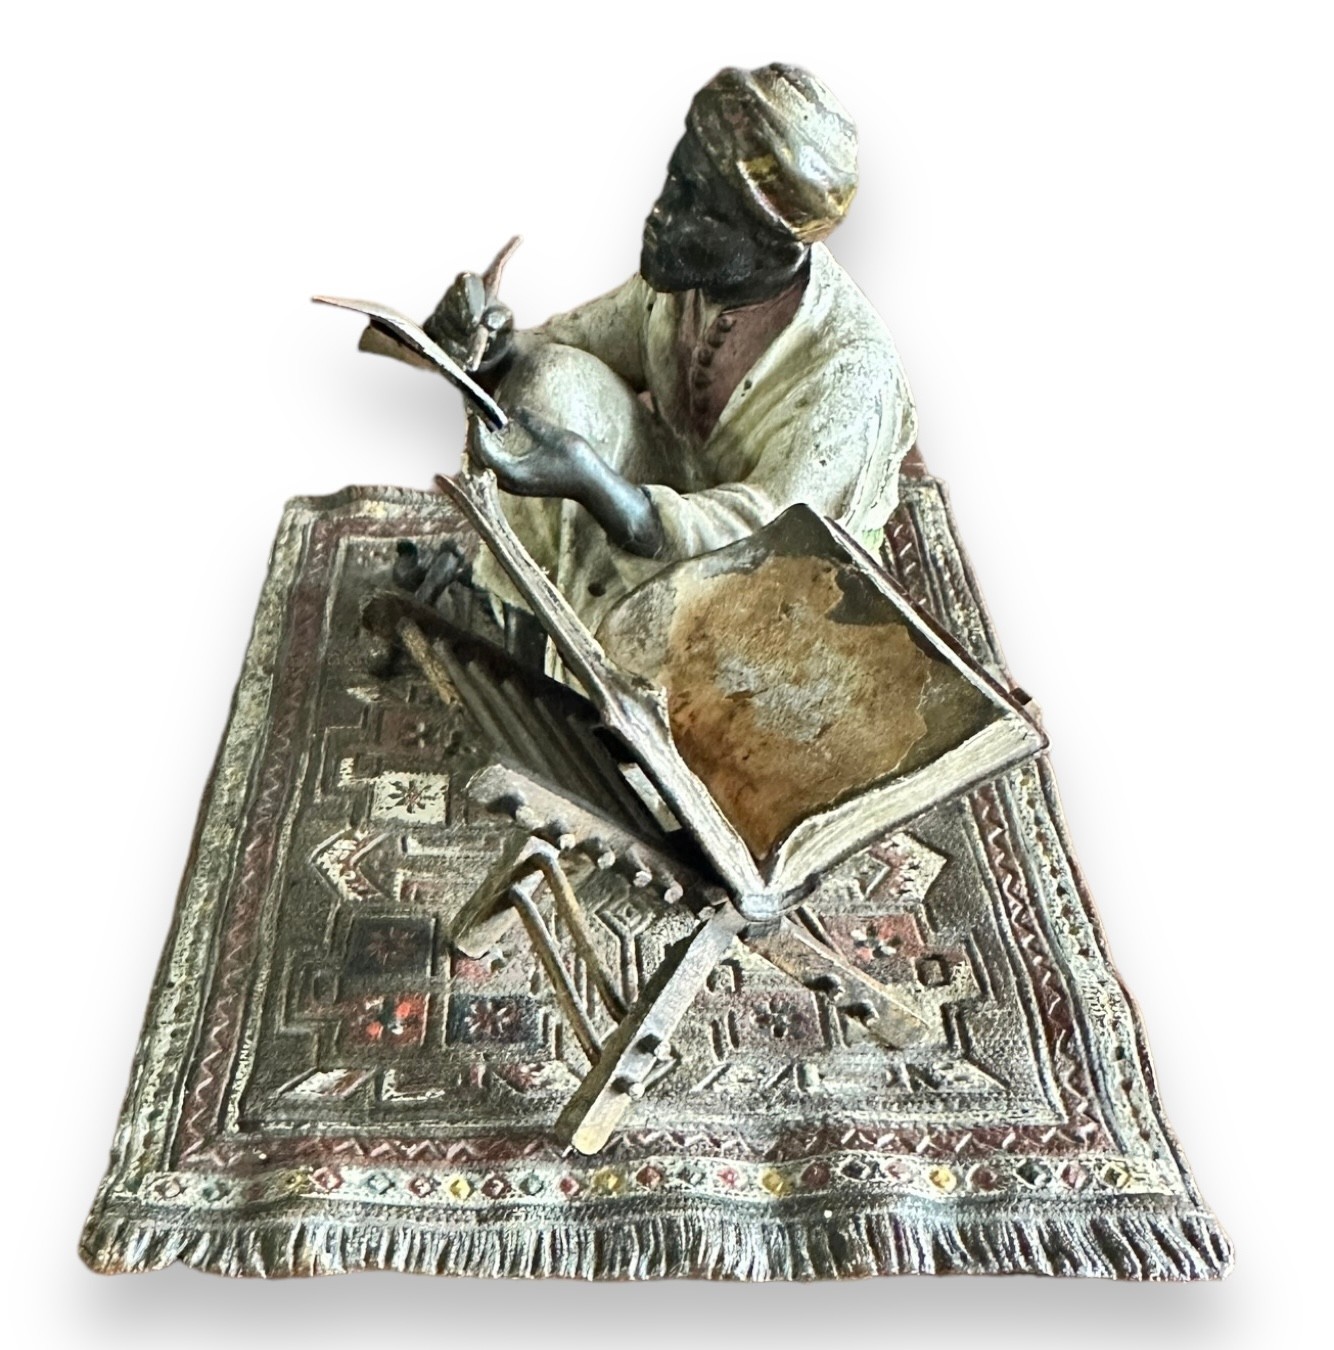 Franz Bergman (Austrian, 1861-1936), late 19th century, cast as an Arab scribe seated on a carpet, - Image 3 of 5